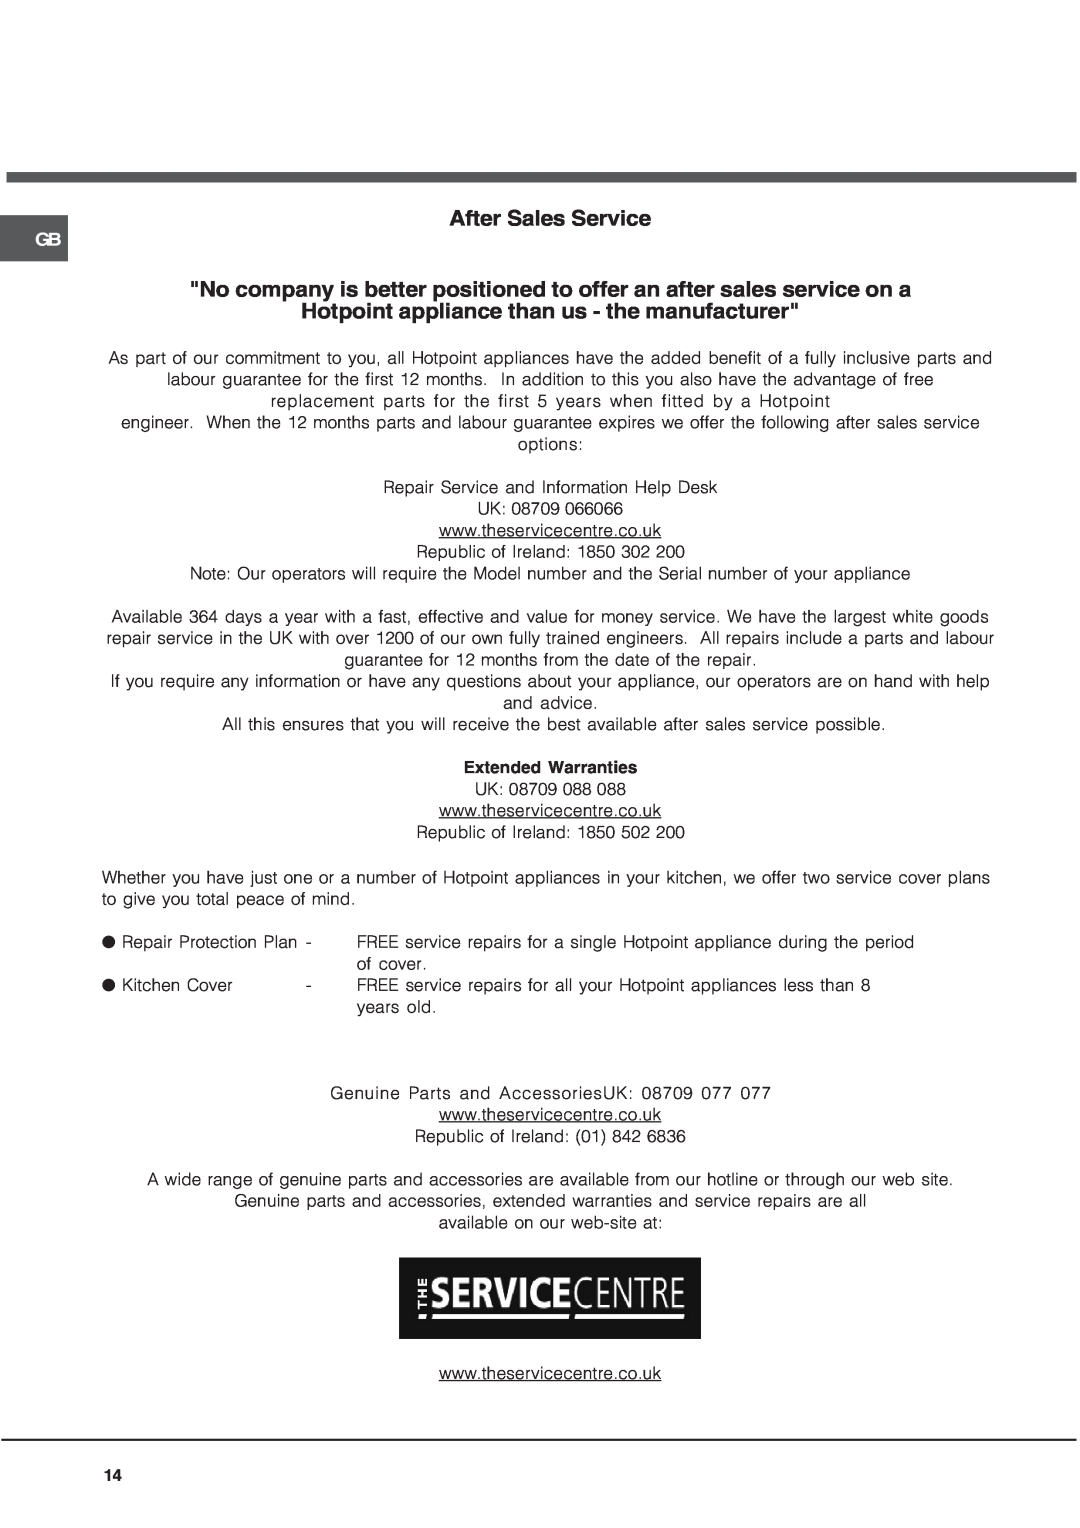 Hotpoint CRA 641 DC operating instructions After Sales Service, Hotpoint appliance than us - the manufacturer 